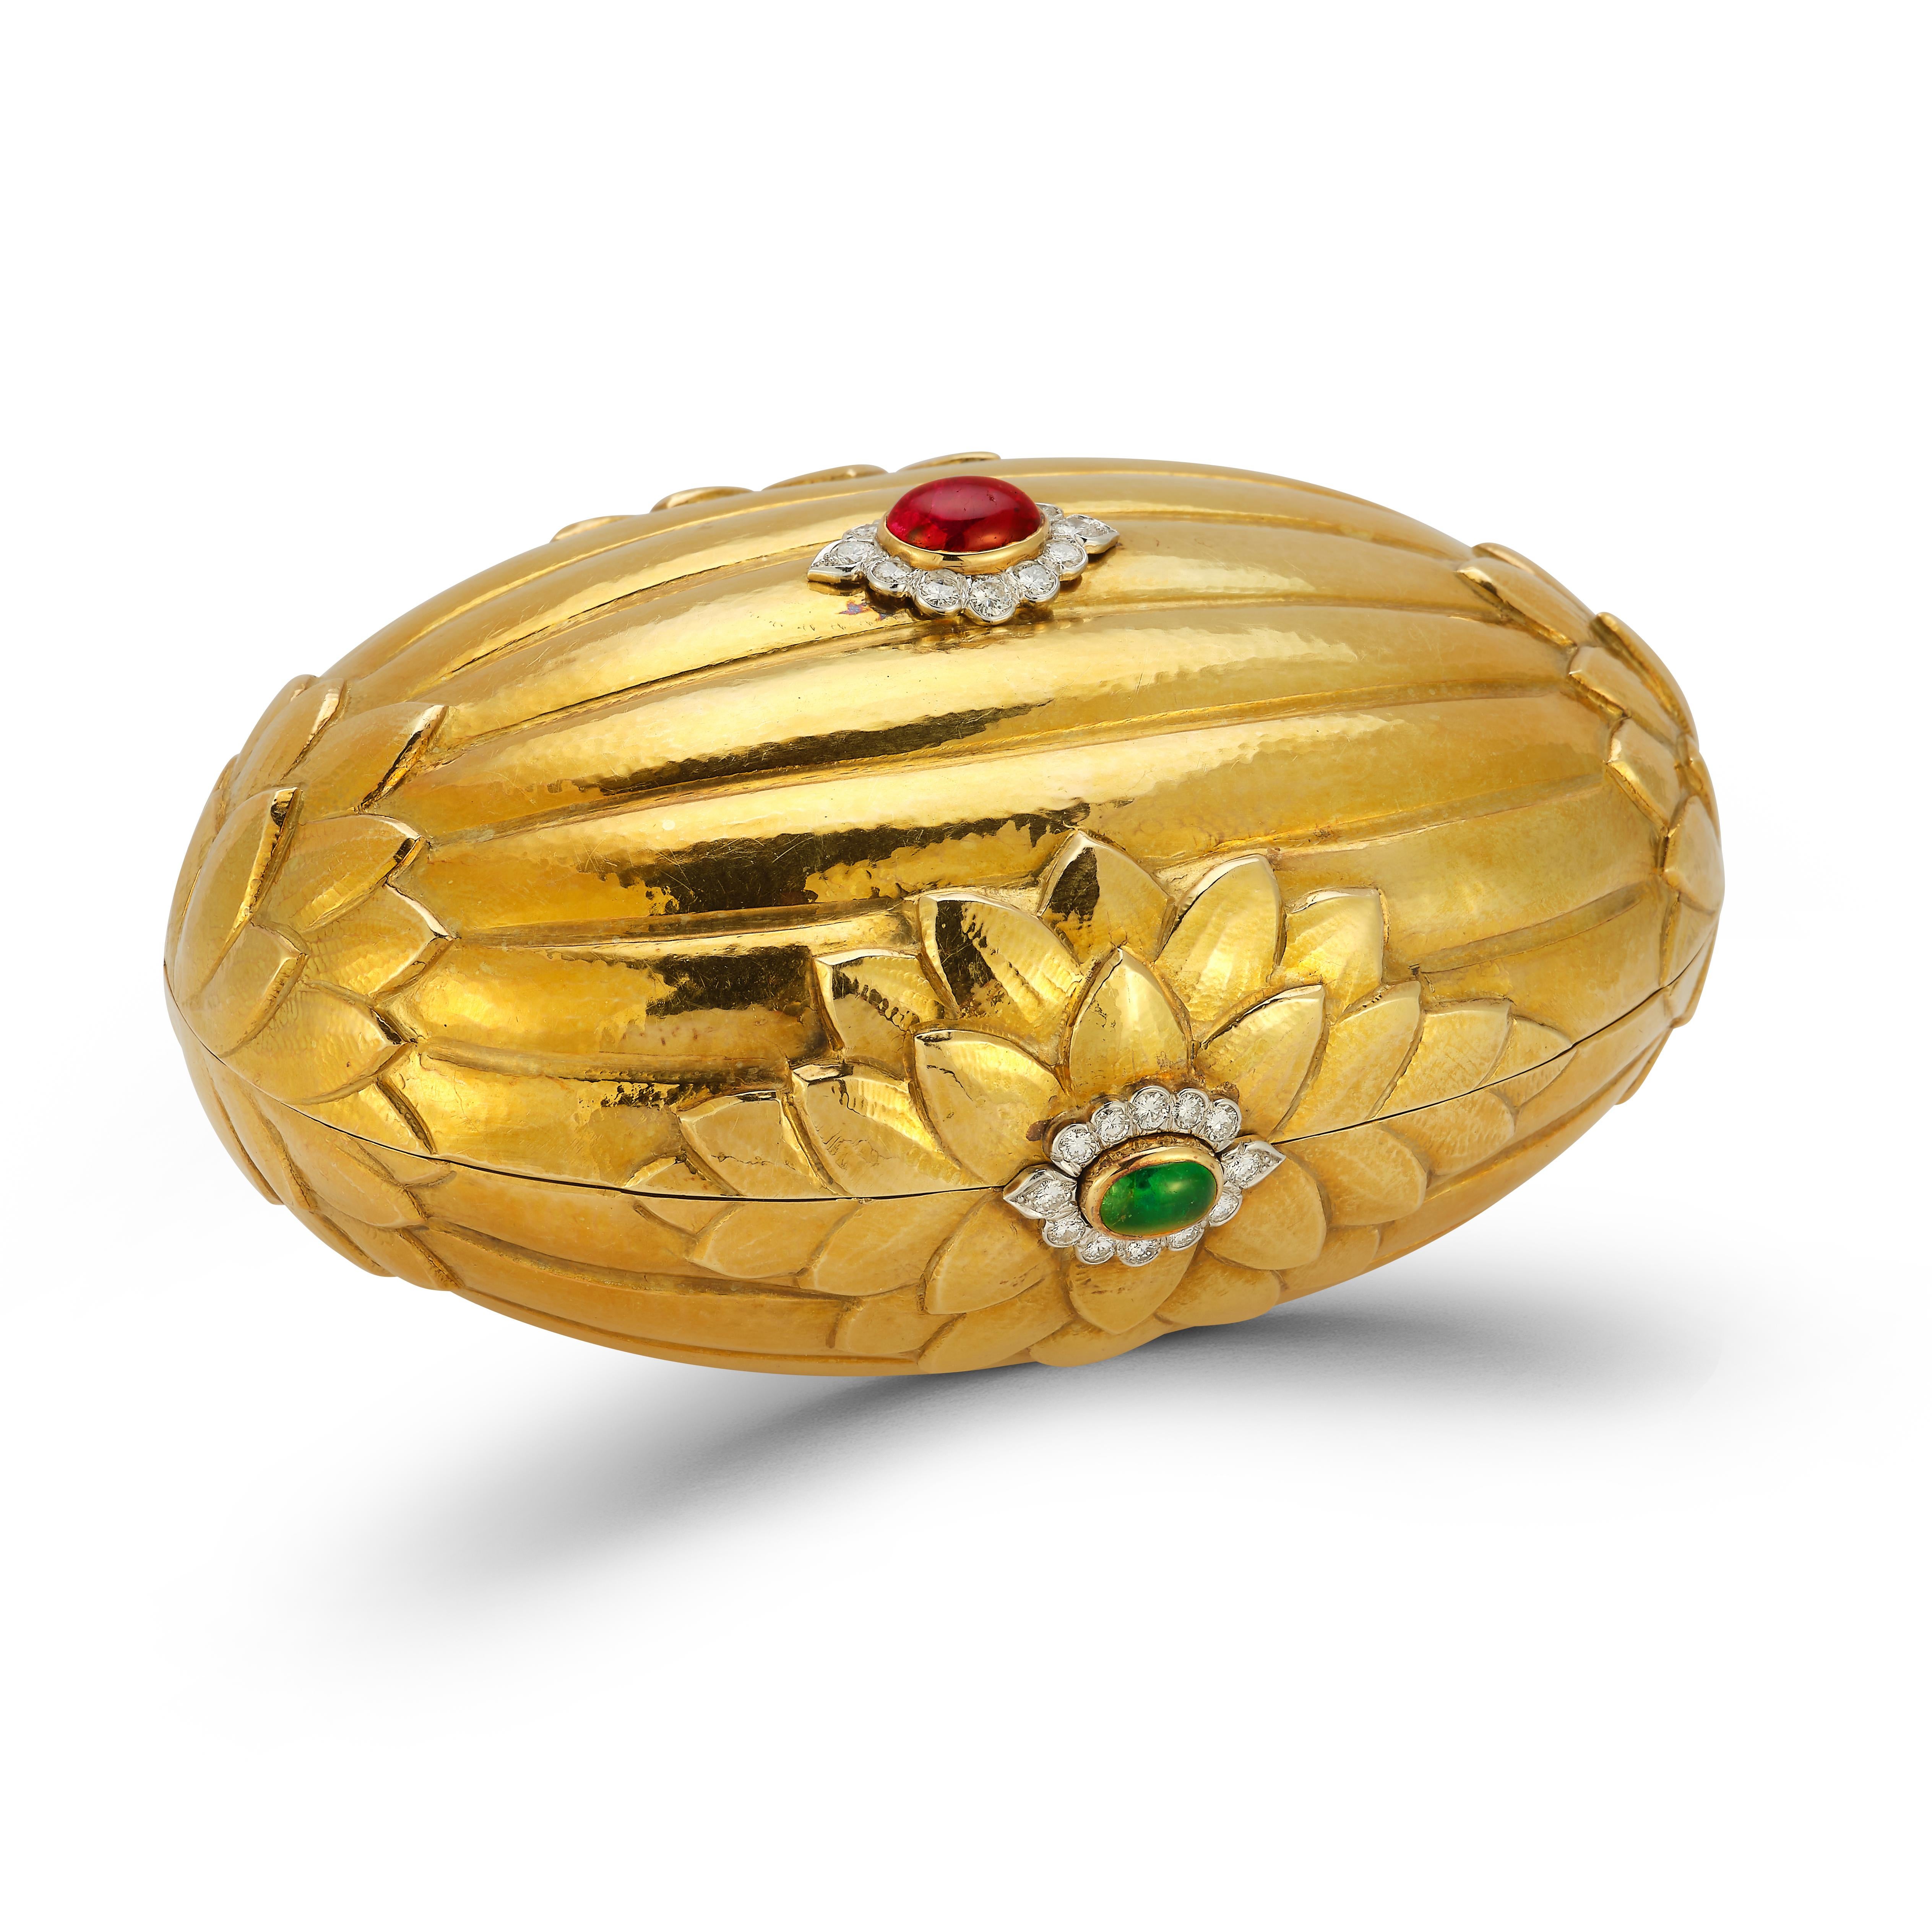 Mutli Gem Gold Clutch by David Webb

The fluted gold clutch with foliate gold accents, set with ruby and emerald cabochons, surrounded by round diamonds, opening to reveal a mirror.

Diamonds weighing a total of approximately 2.70 carats

Diamonds